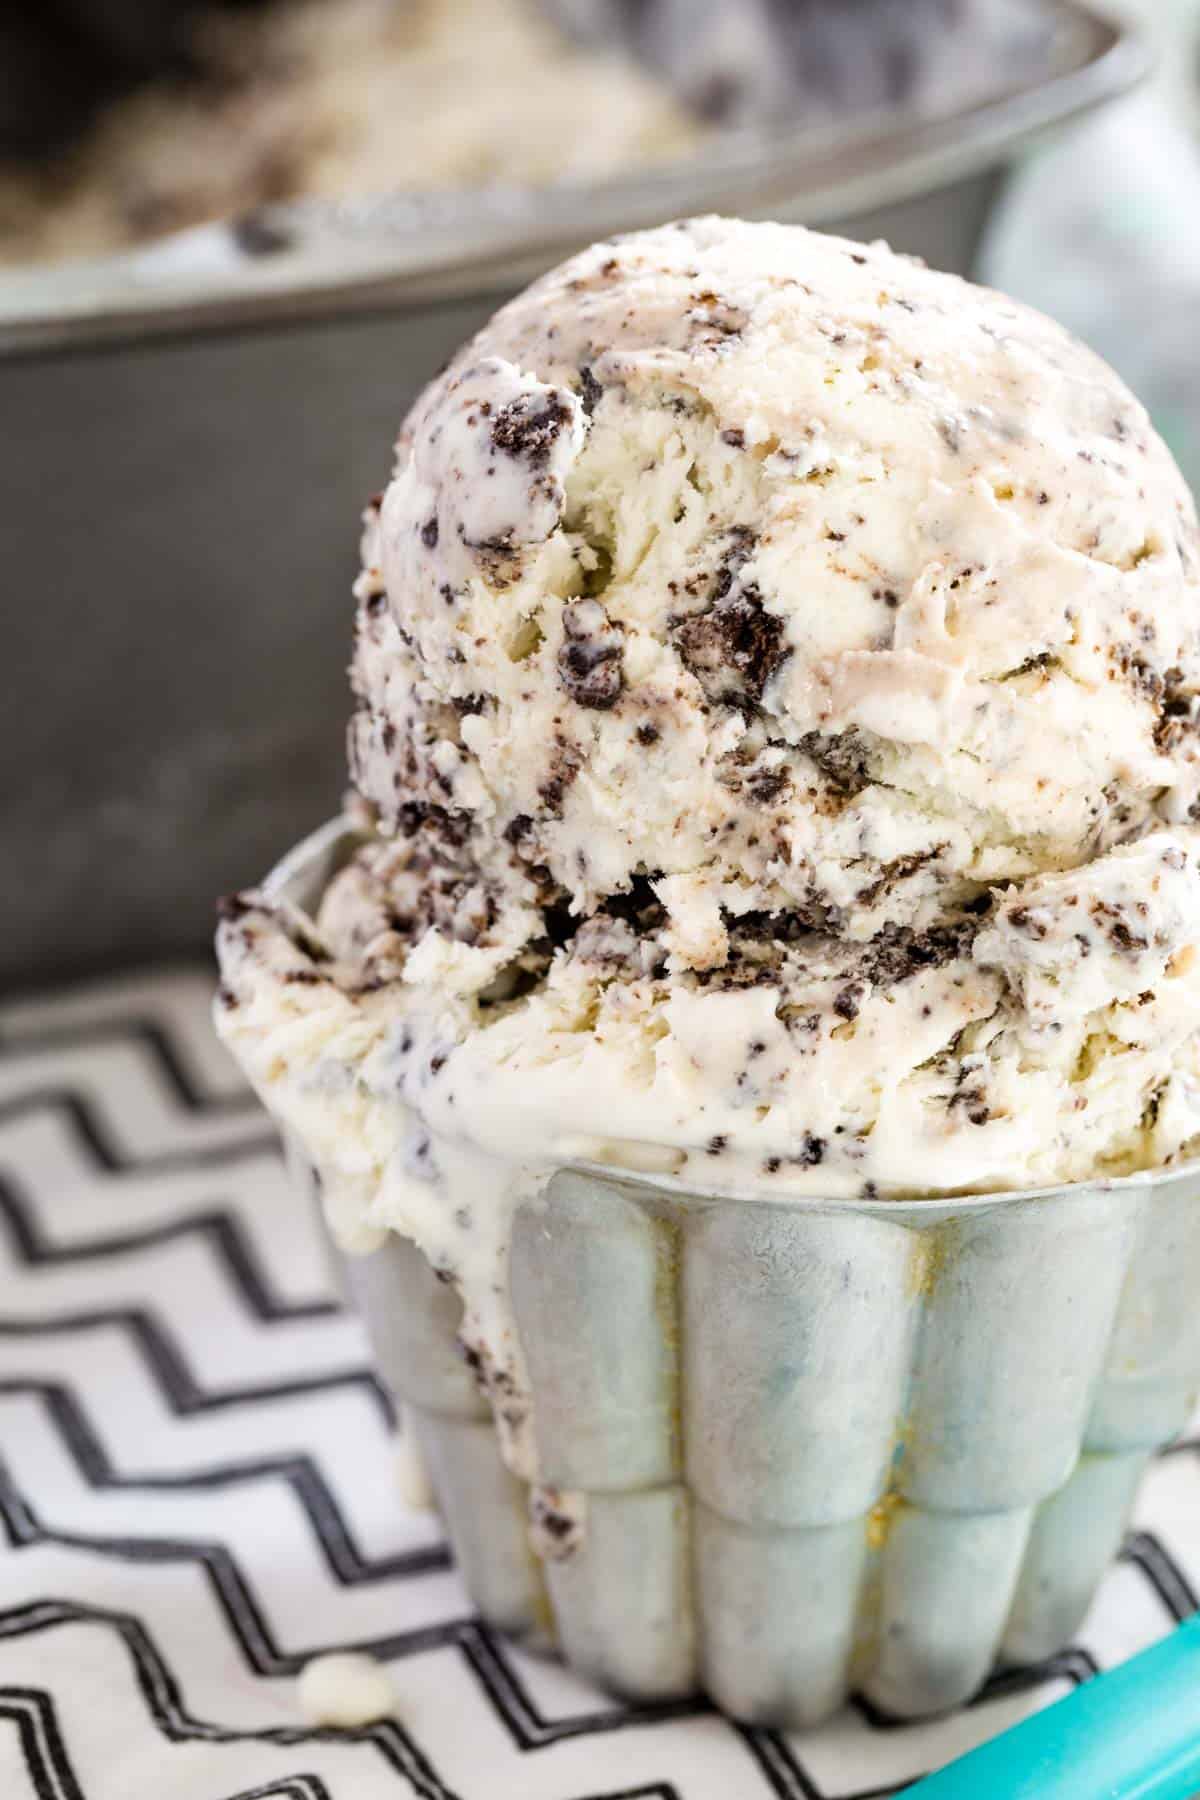 A scoop of cookies and cream ice cream in a bowl.